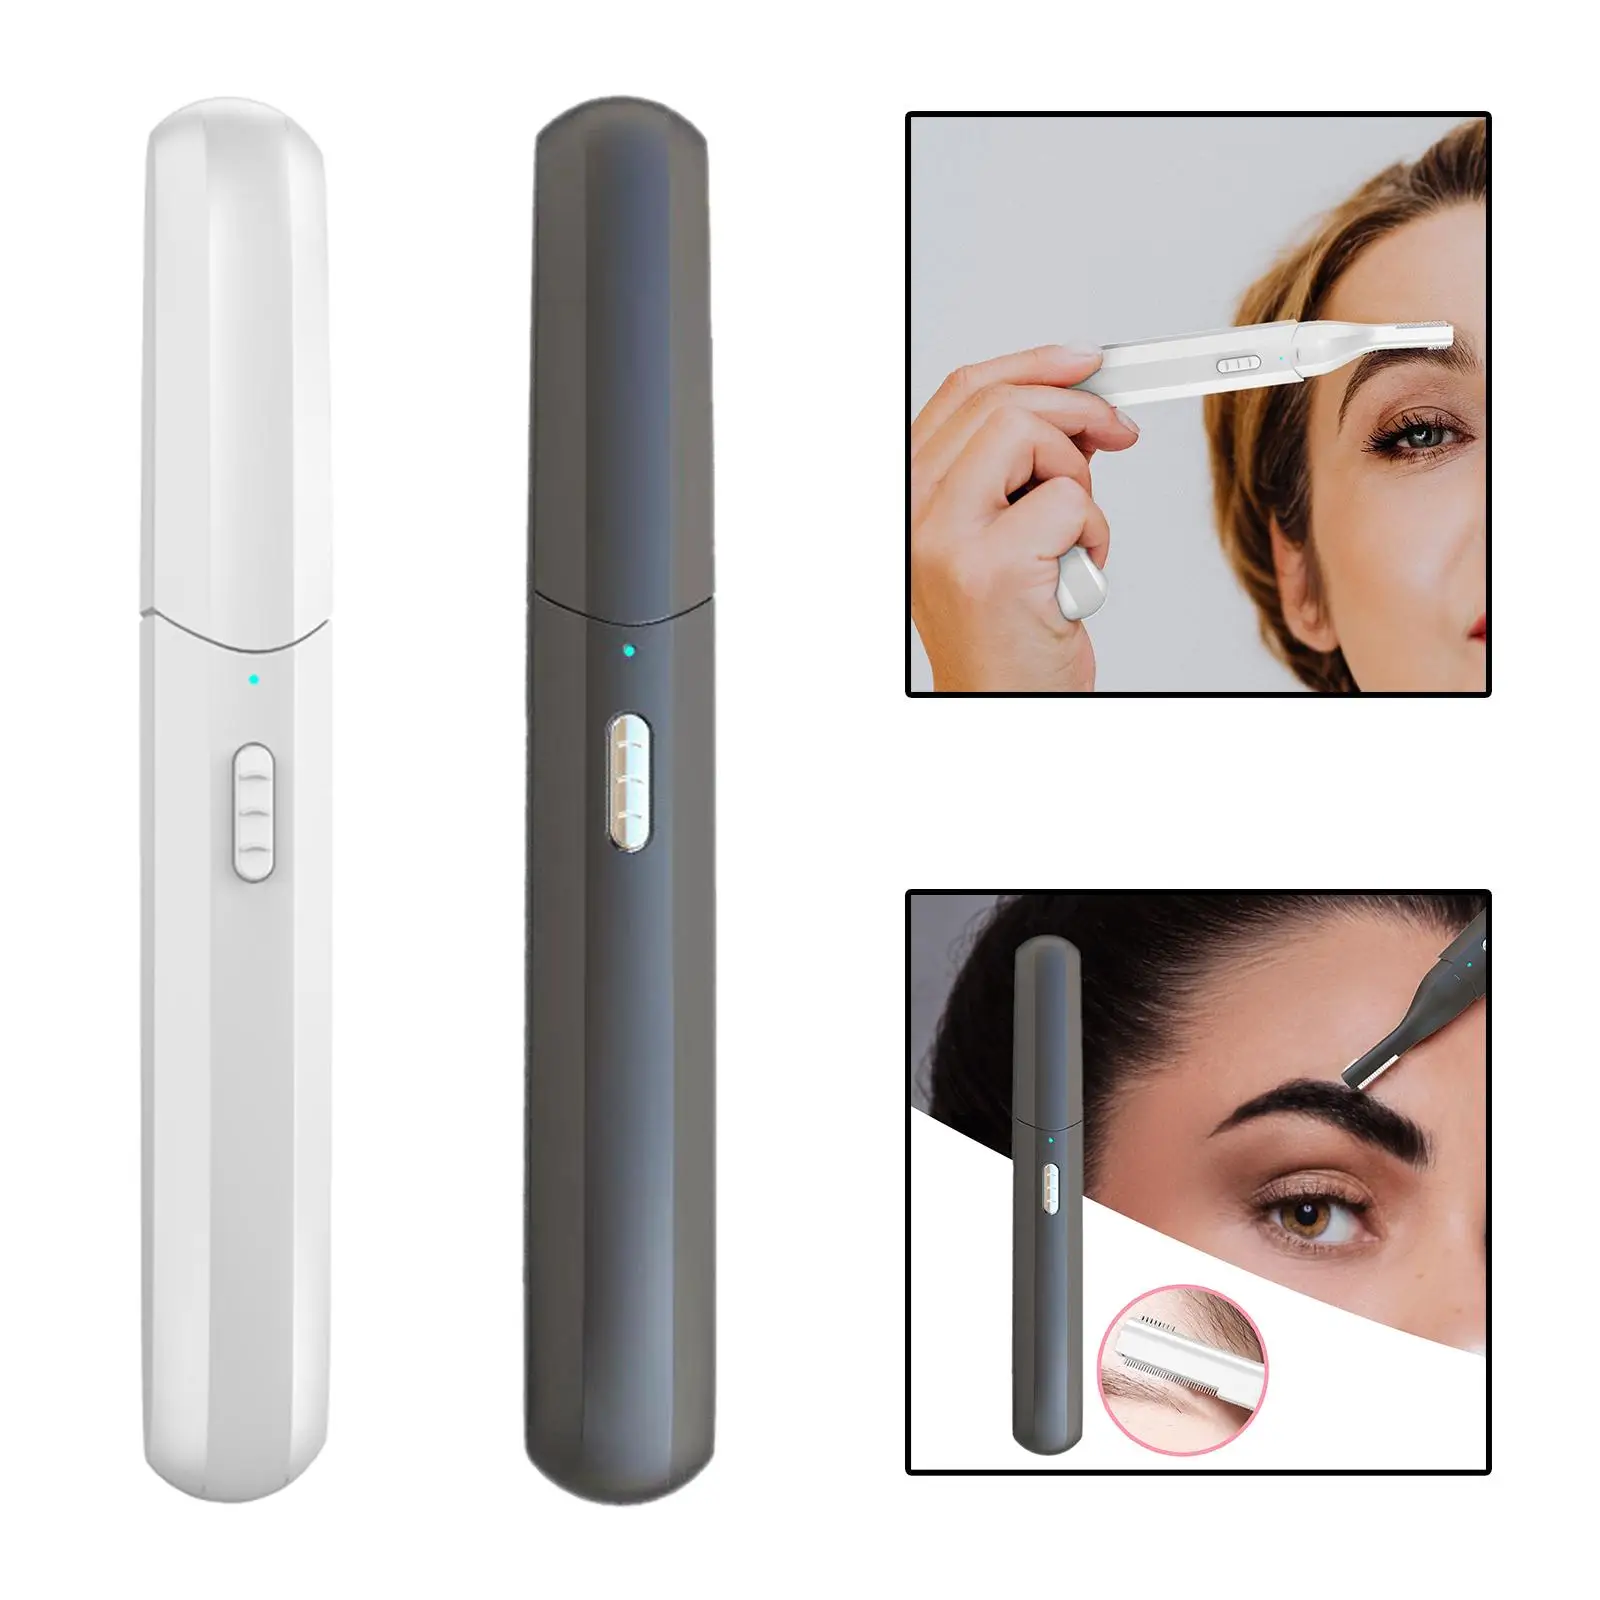 Portable Scrtachproof Hair Removal Tool with Dual Cutter Head Facial Shaving Tool Electric Eyebrow trimming for Lips